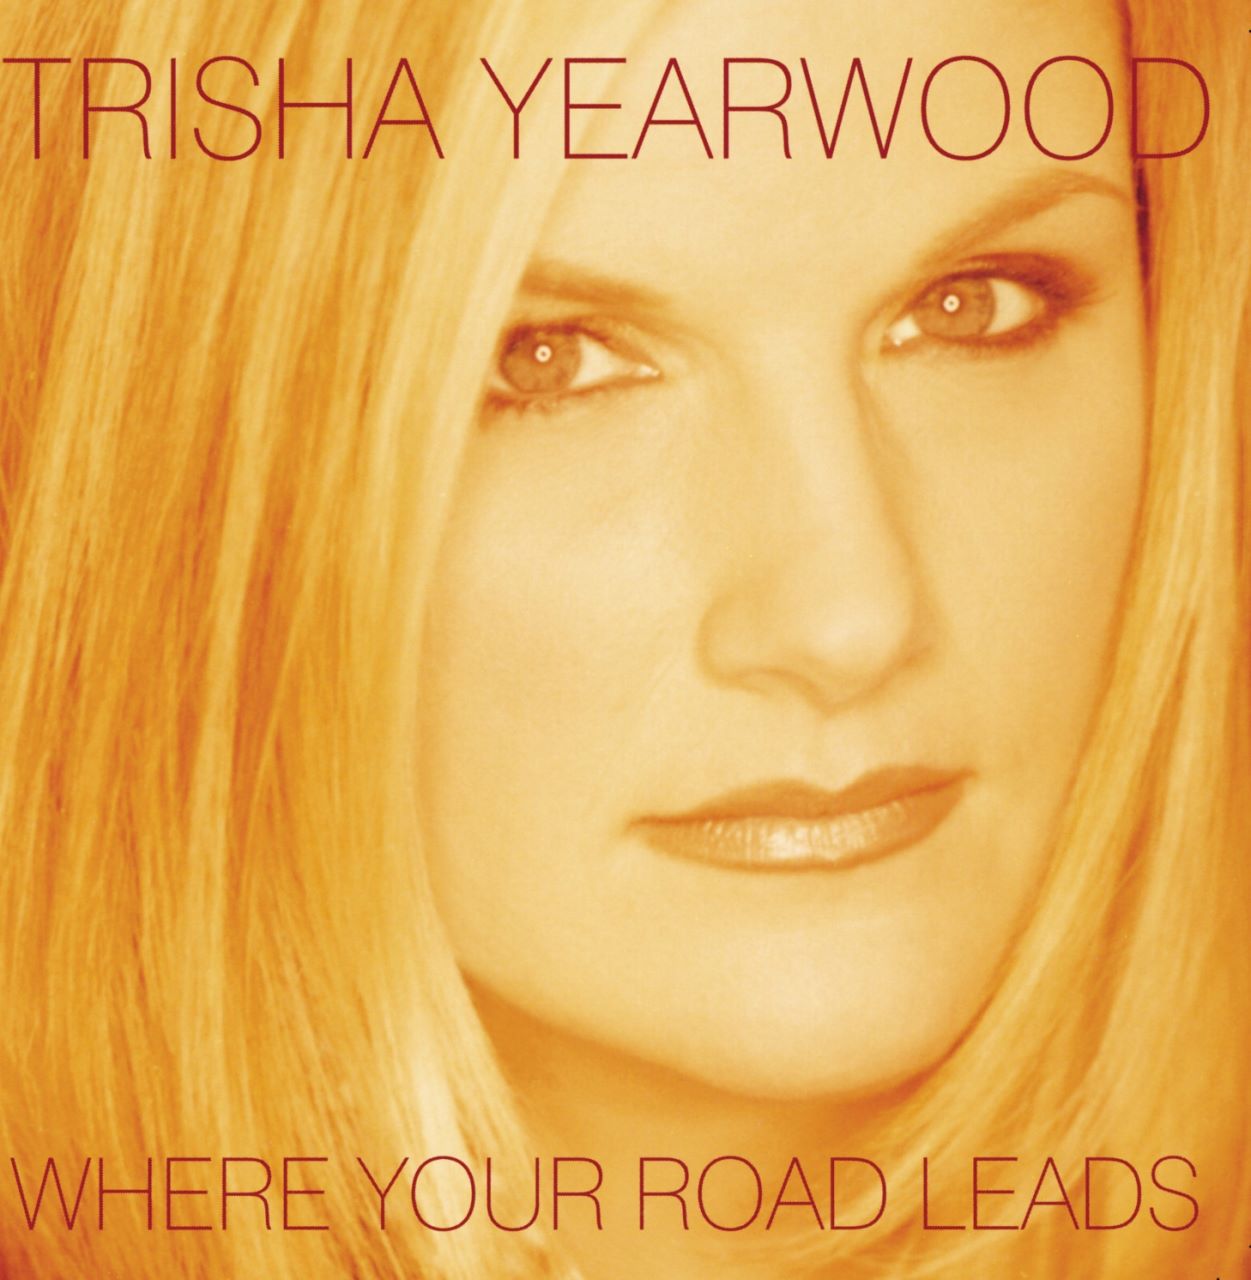 Trisha Yearwood – Where Your Road Leads cover album